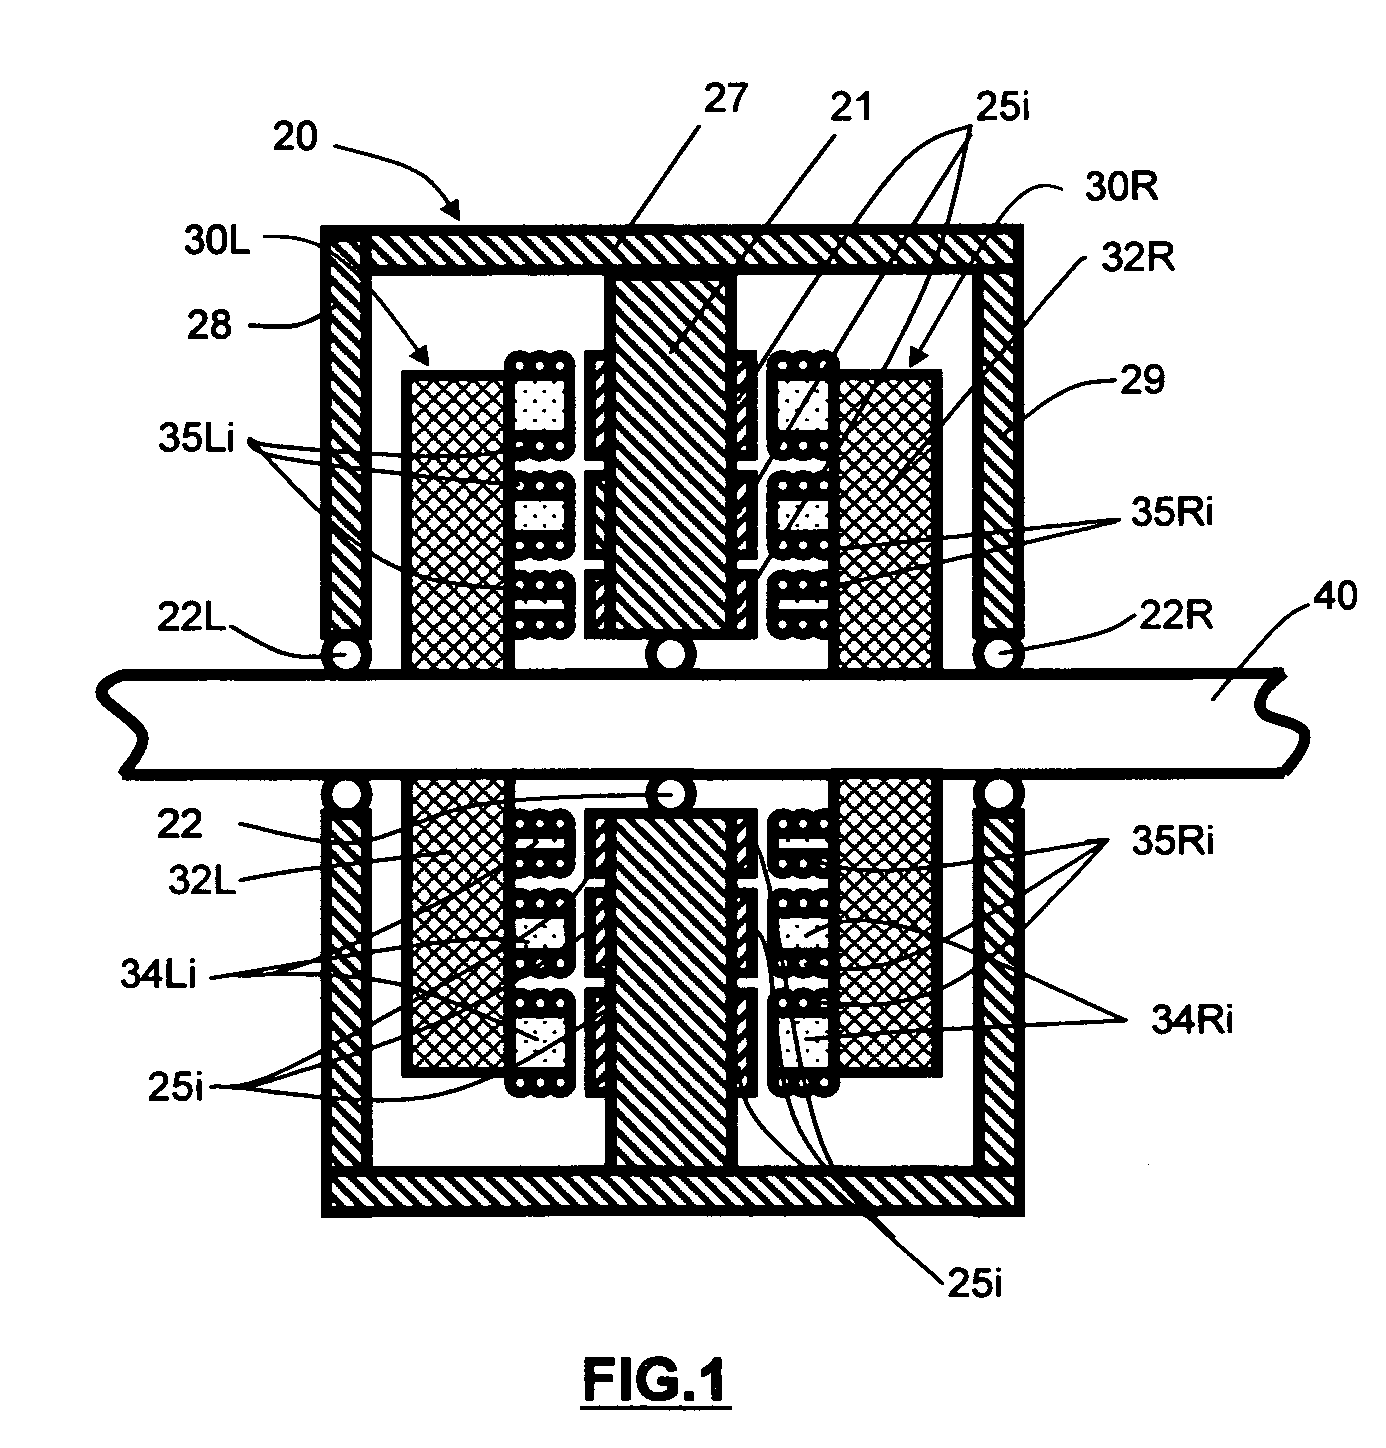 Vehicle disk motor with movable magnet poles